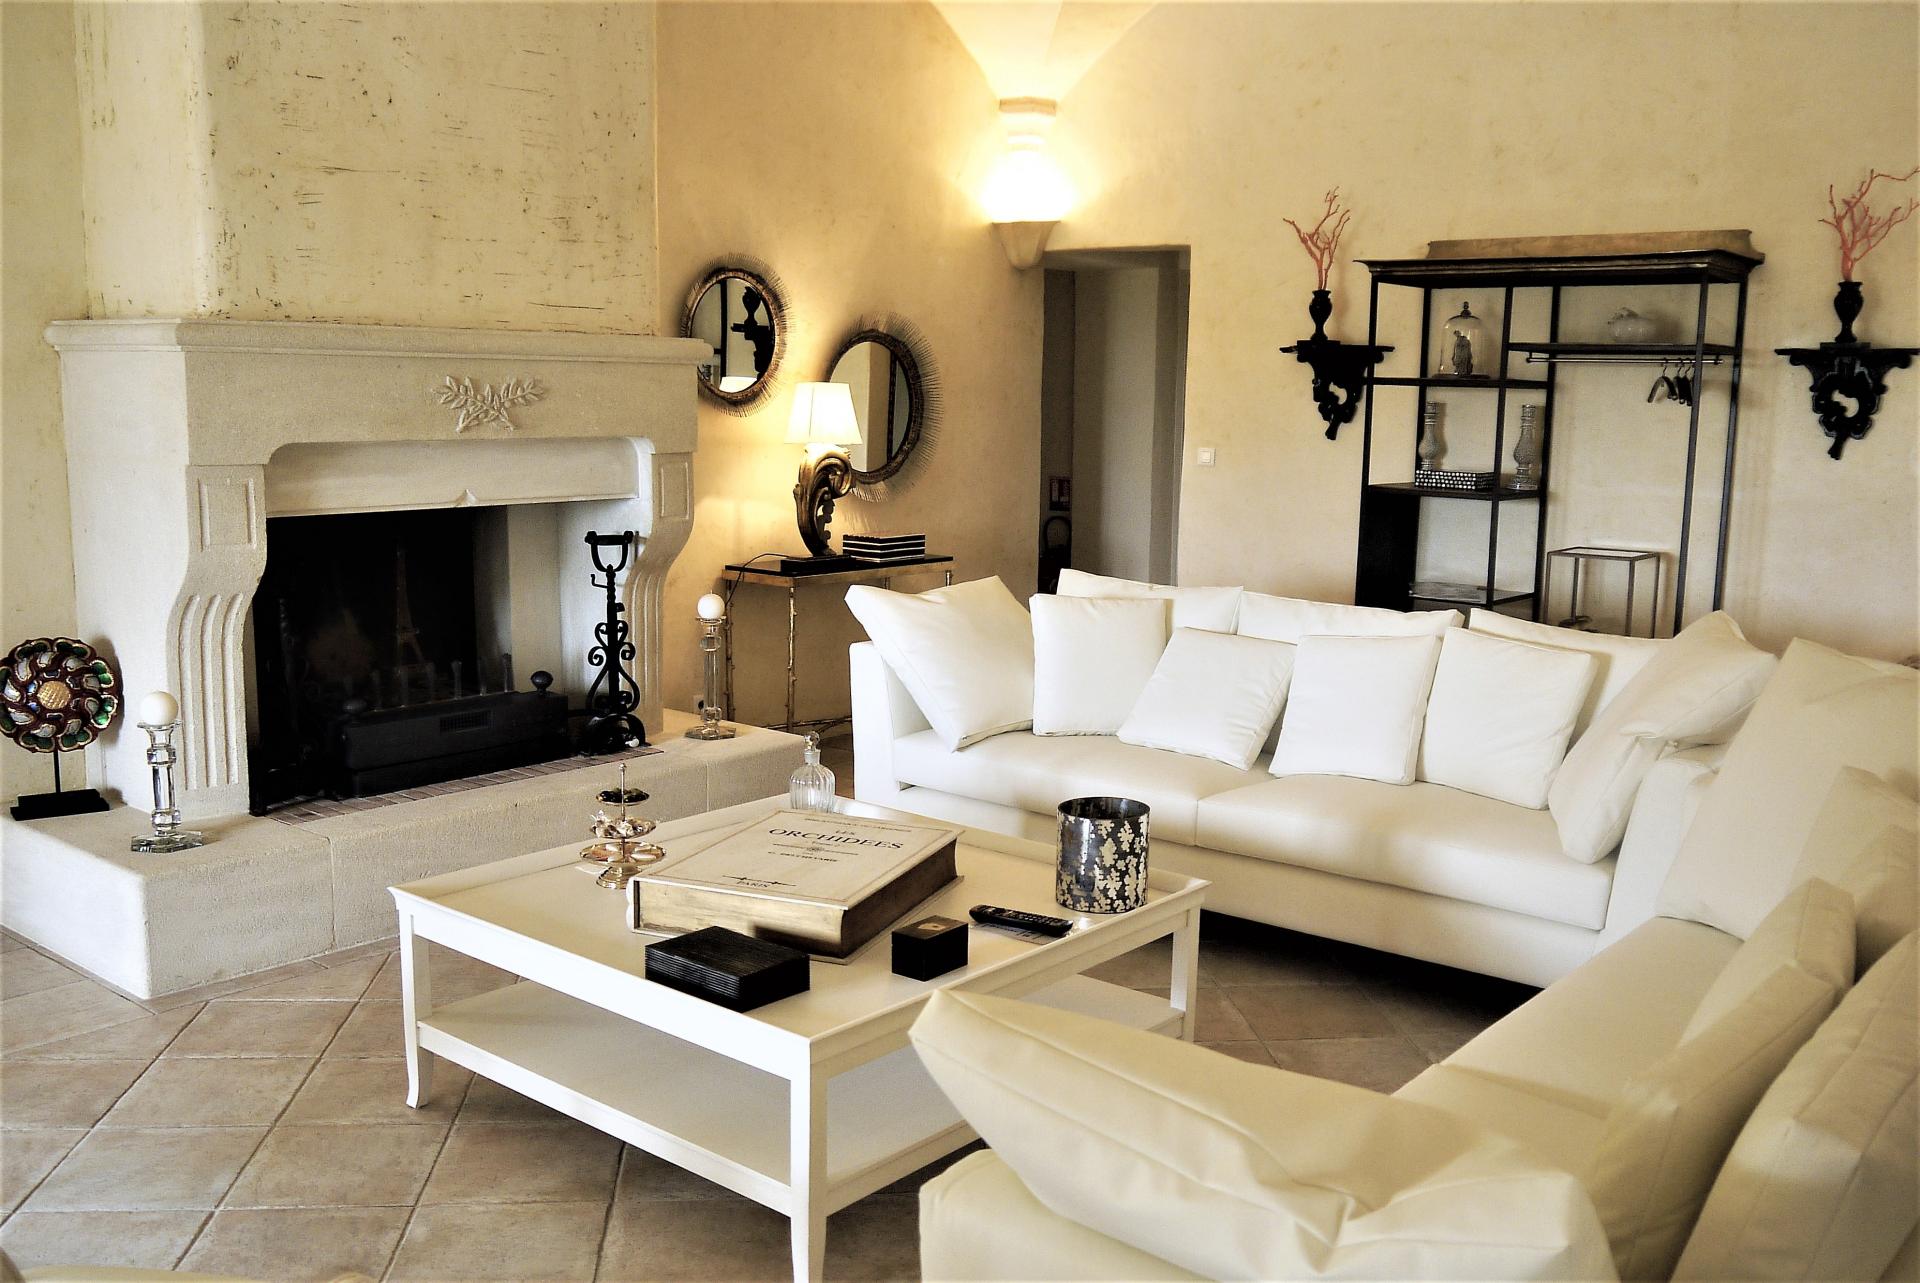 THE FIREPLACE CORNER IN LA VILLA ANGELE HOLIDAY RENTAL IN LUBERON PROVENCE